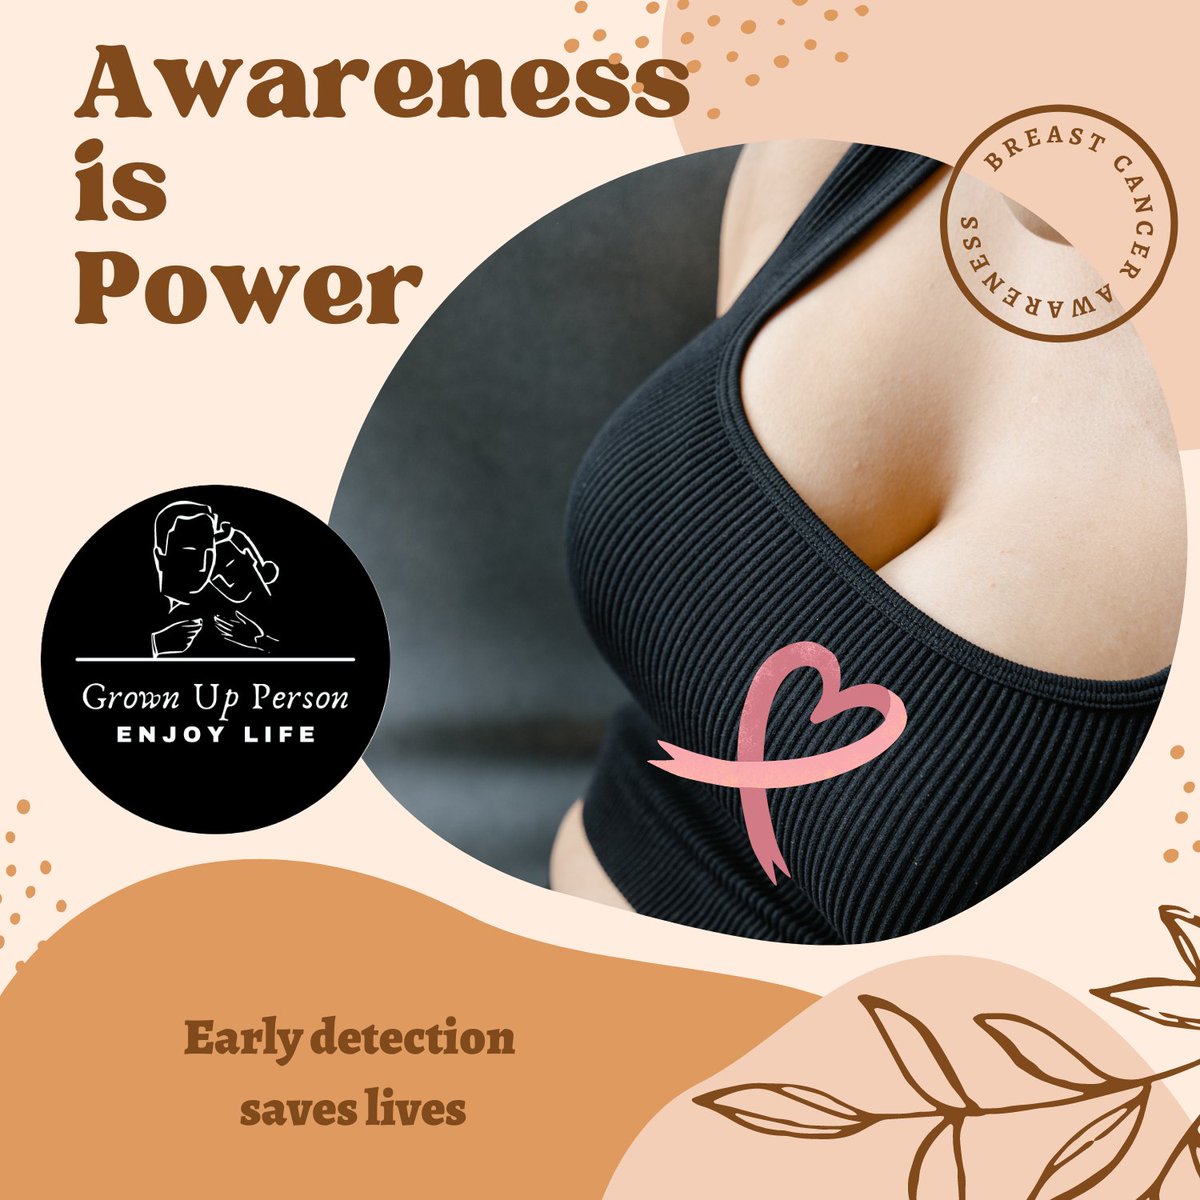 DON'T IGNORE
For your protection, it's better to check yourself.
grownupperson.blogspot.com/p/information-…
#breastcancer #breastcancerawareness 
#AwarenessPost #AwarenessMatters
#earlydetection  #firststage #information 
#knowledge #DontIgnore #StayProtected 
#checkyourself #breastcancersupport